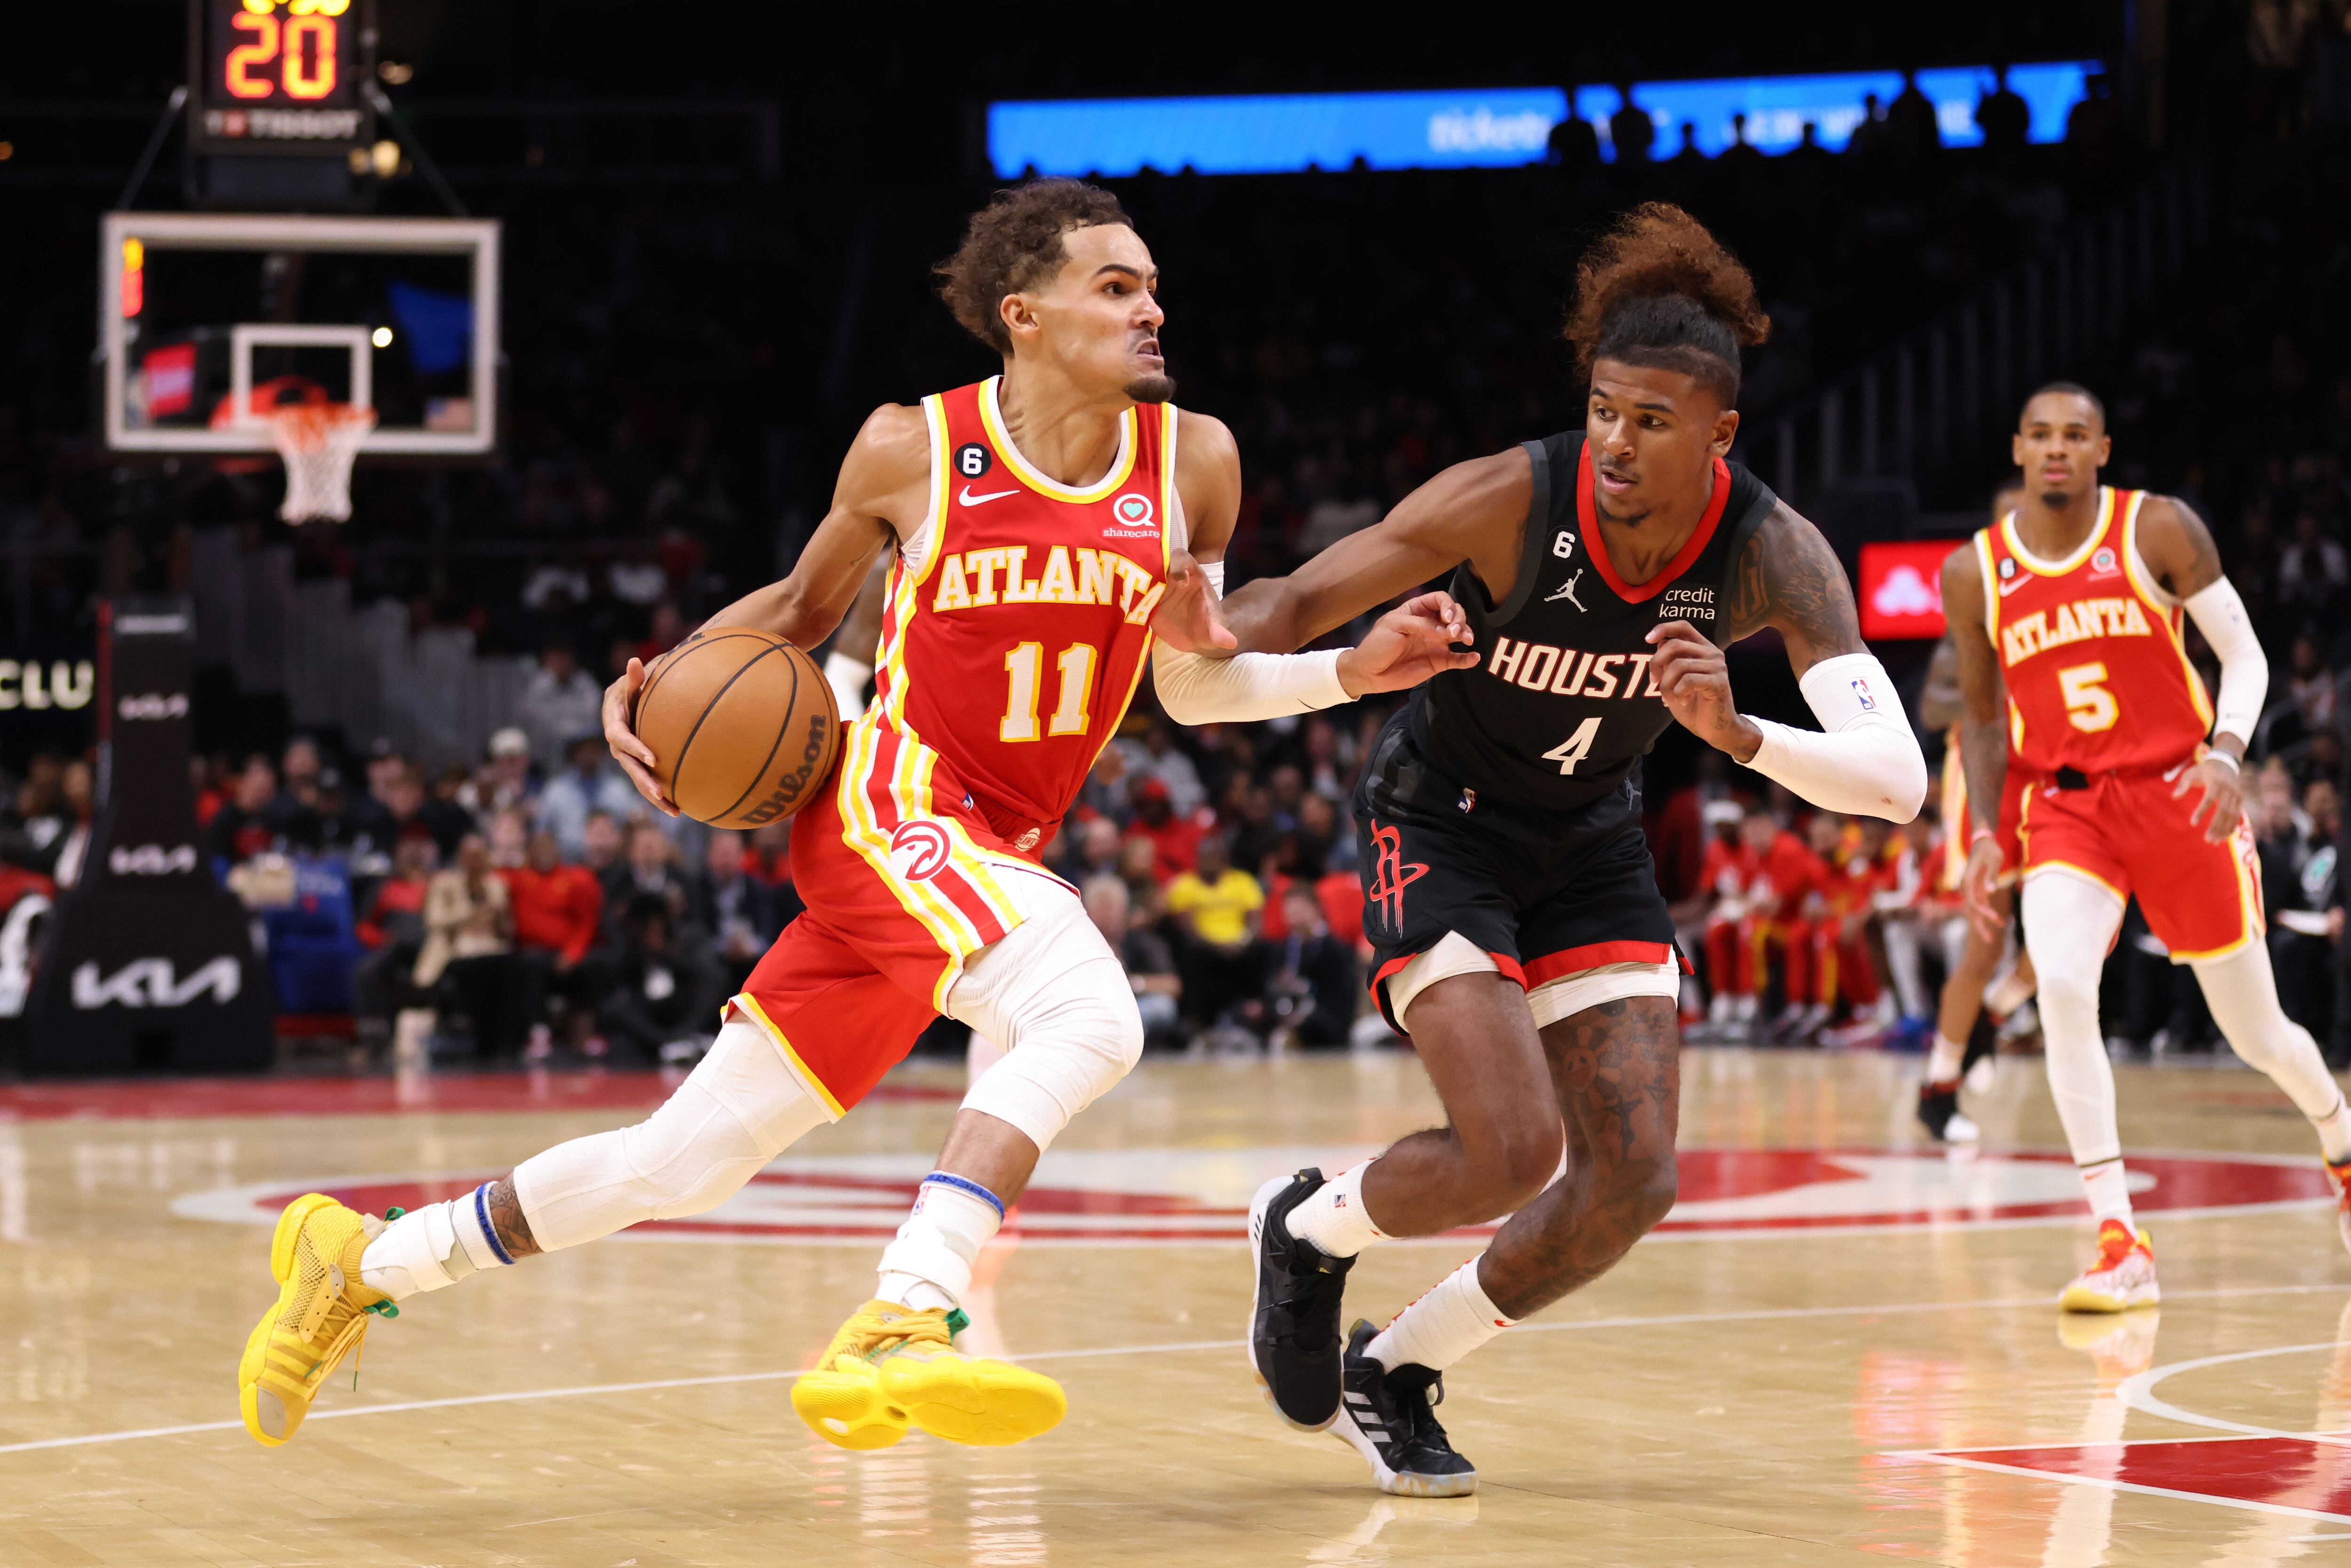 From Deep: The Hawks' balancing act, starring Trae Young and Dejounte Murray  